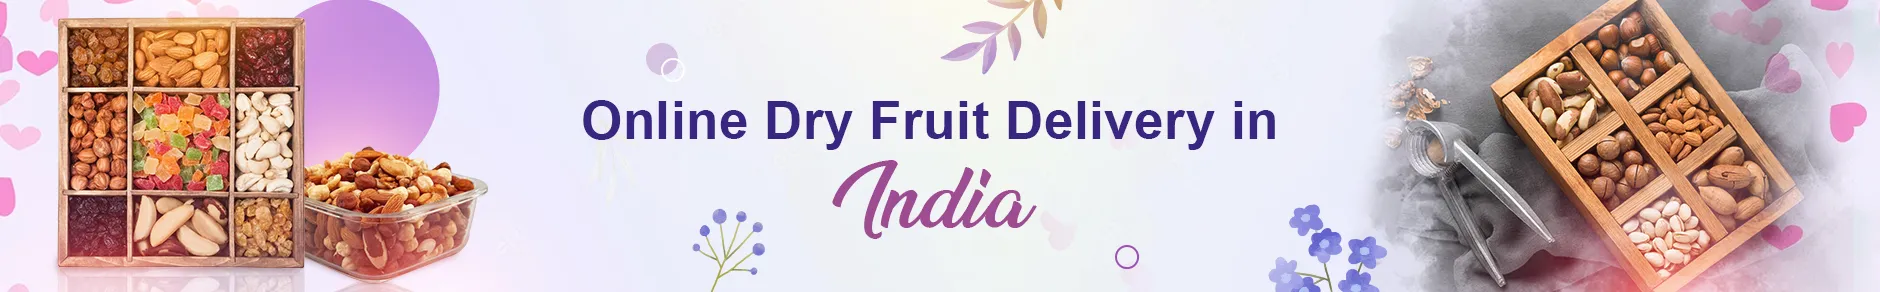 Dry Fruits - Online Dry Fruits Delivery in India